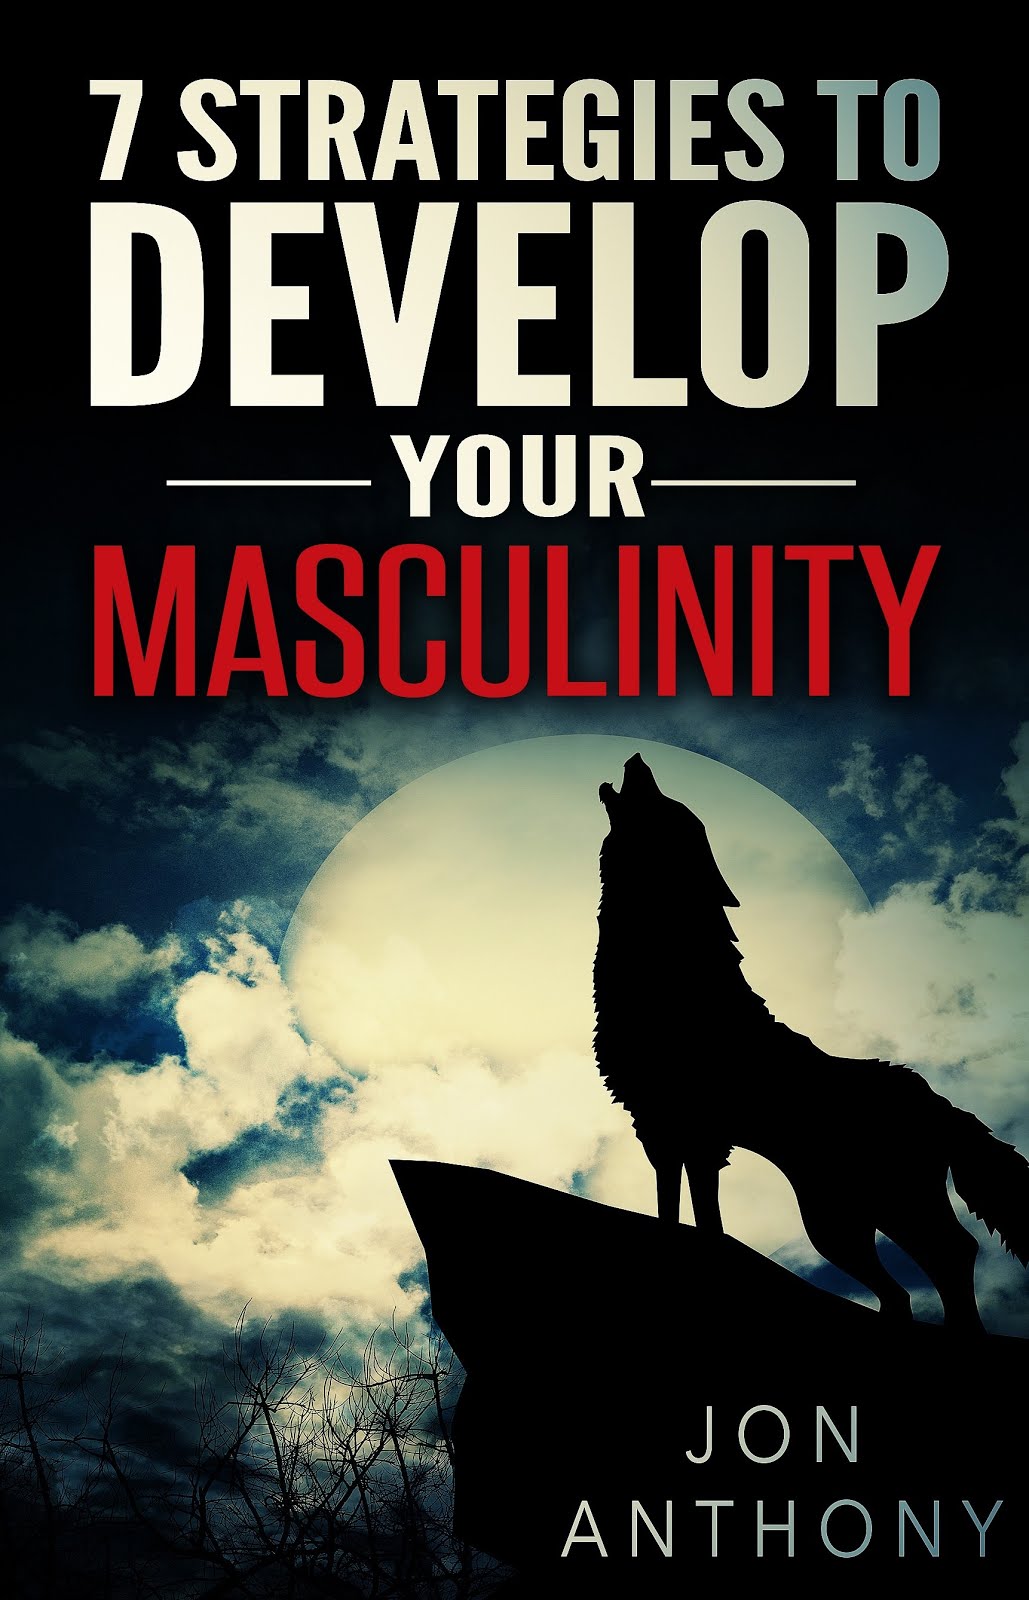 7 Strategies To Develop Your Masculinity